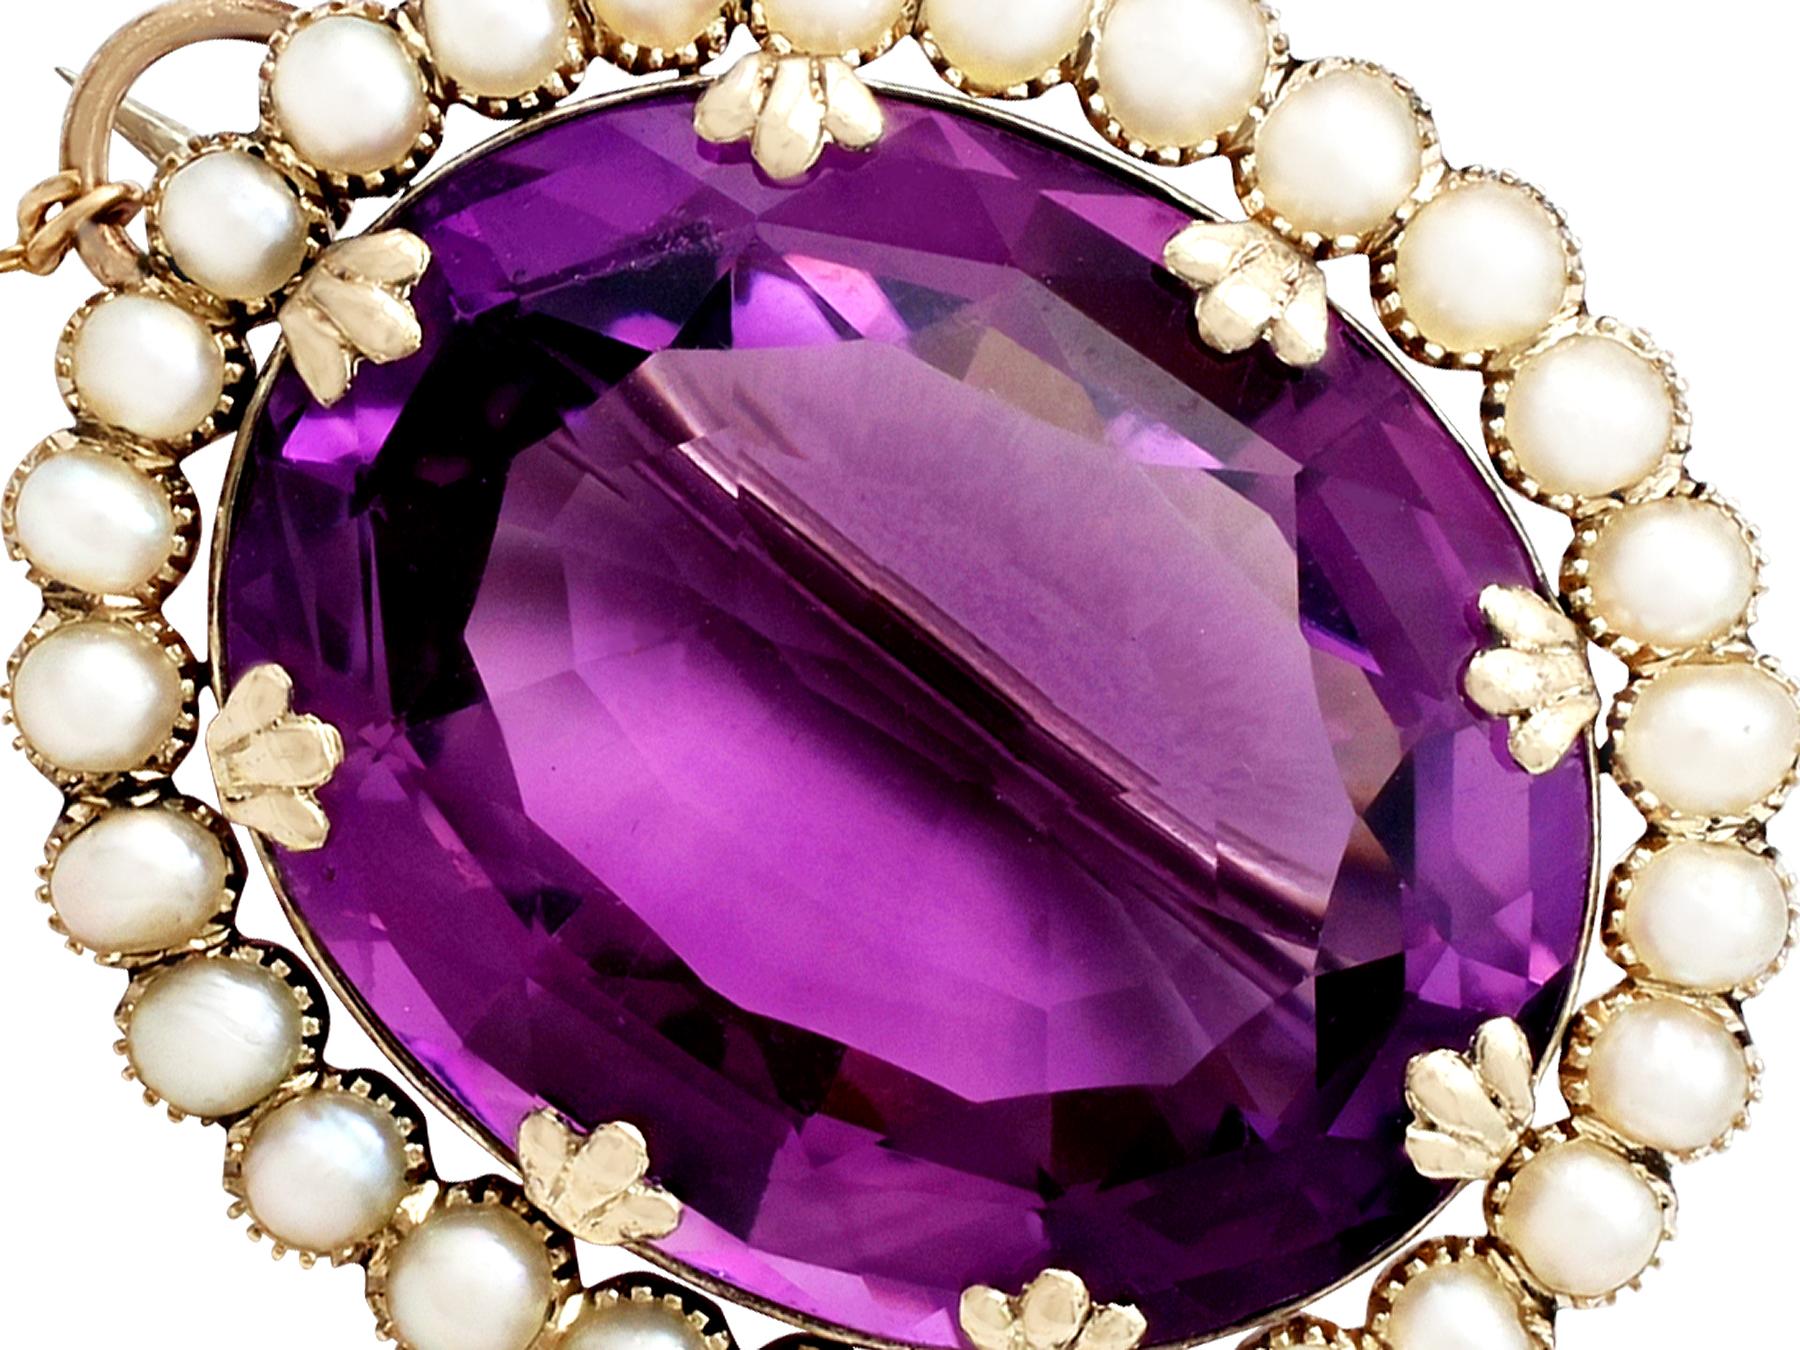 A stunning antique Victorian 39.69 carat amethyst and seed pearl, 10k yellow gold and silver set brooch; part of our diverse antique jewellery and estate jewelry collections.

This stunning, fine and impressive Victorian amethyst brooch has been